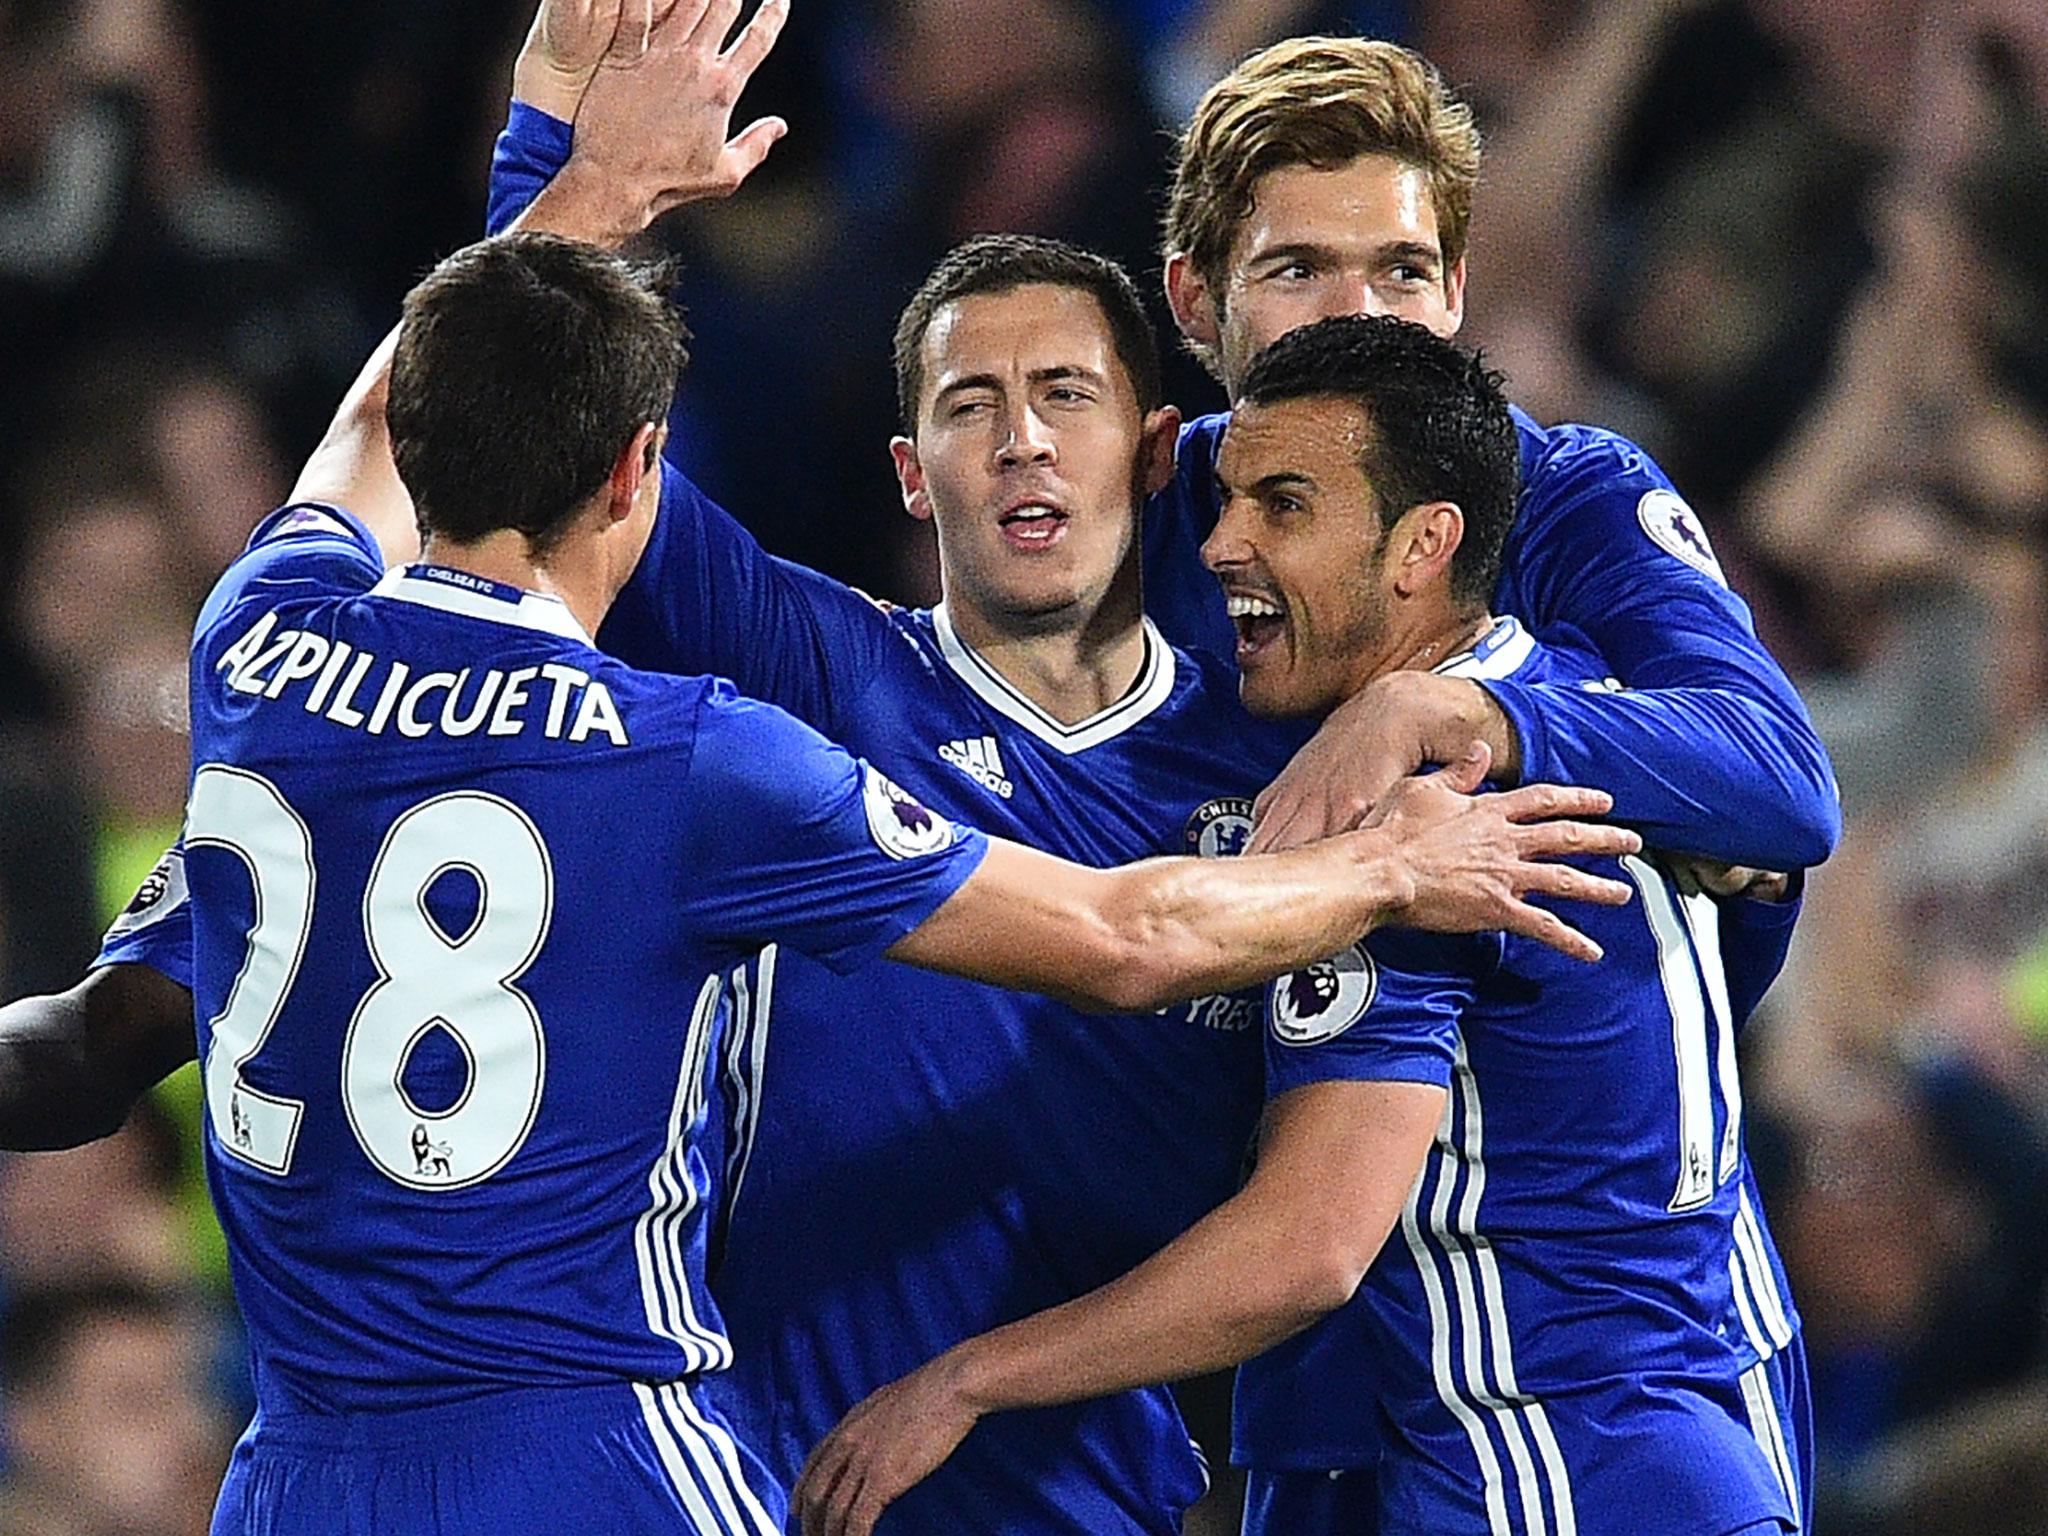 Eden Hazard scored twice as Chelsea edged closer to the title